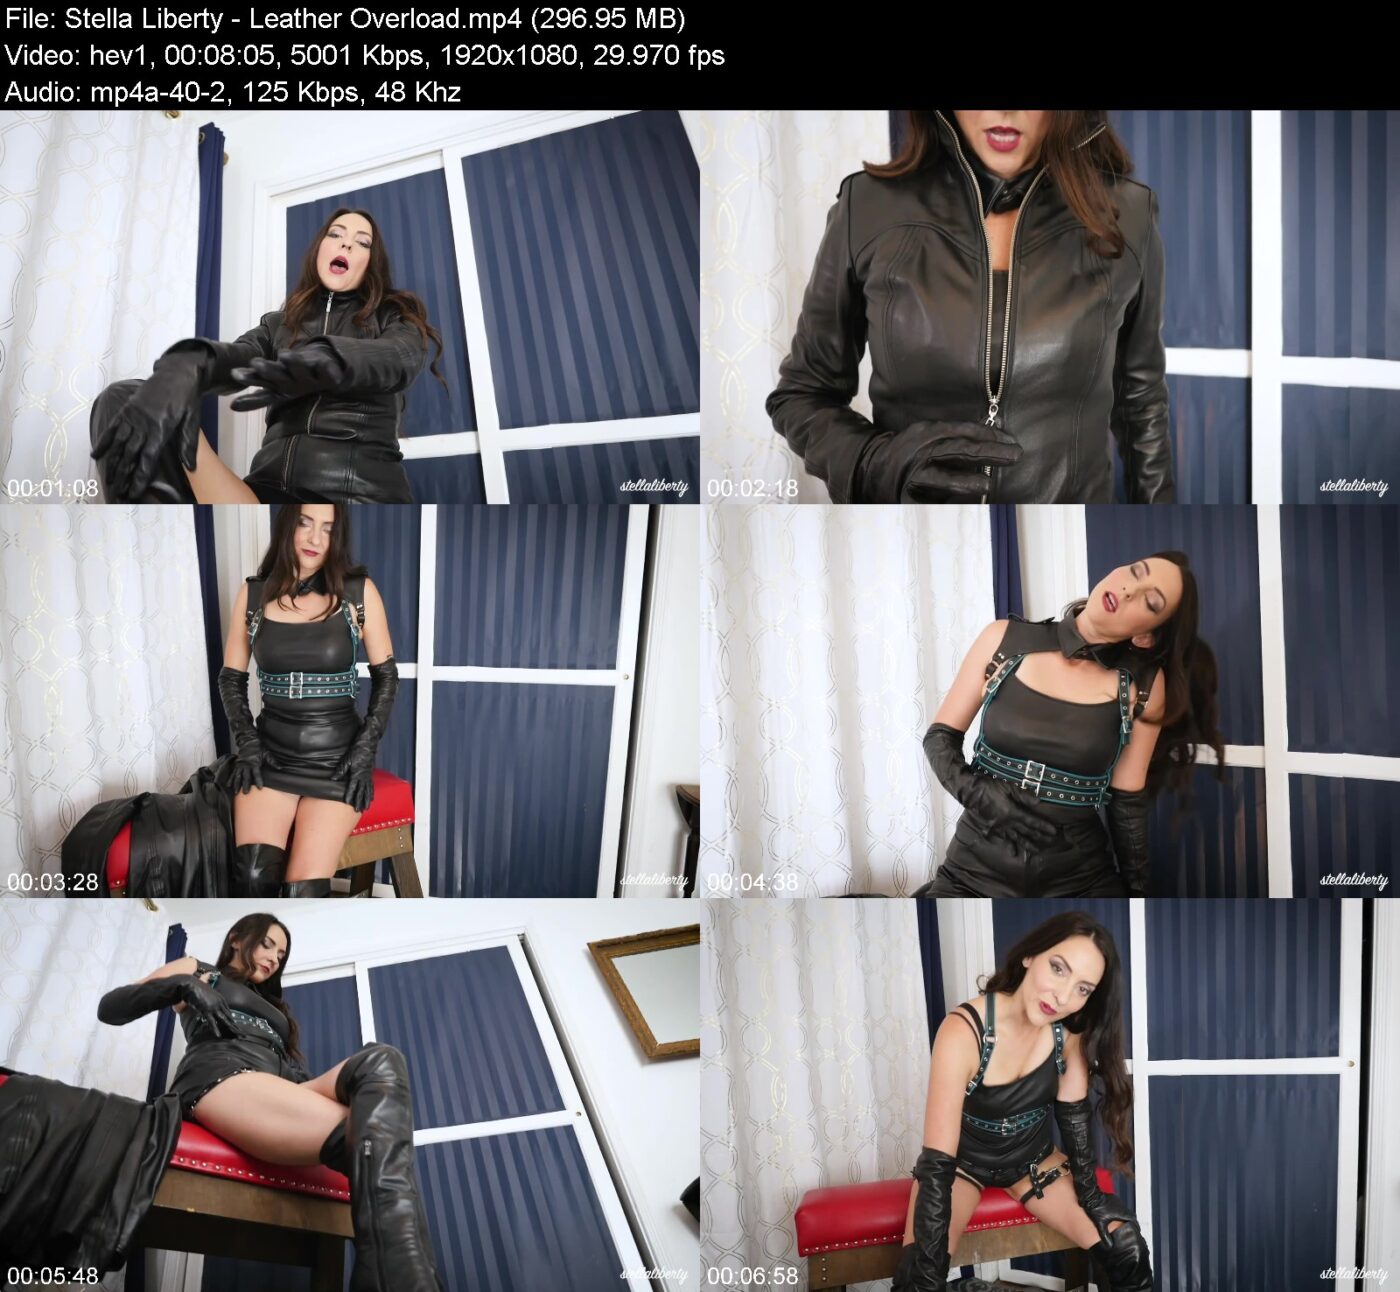 Actress: Stella Liberty. Title and Studio: Leather Overload